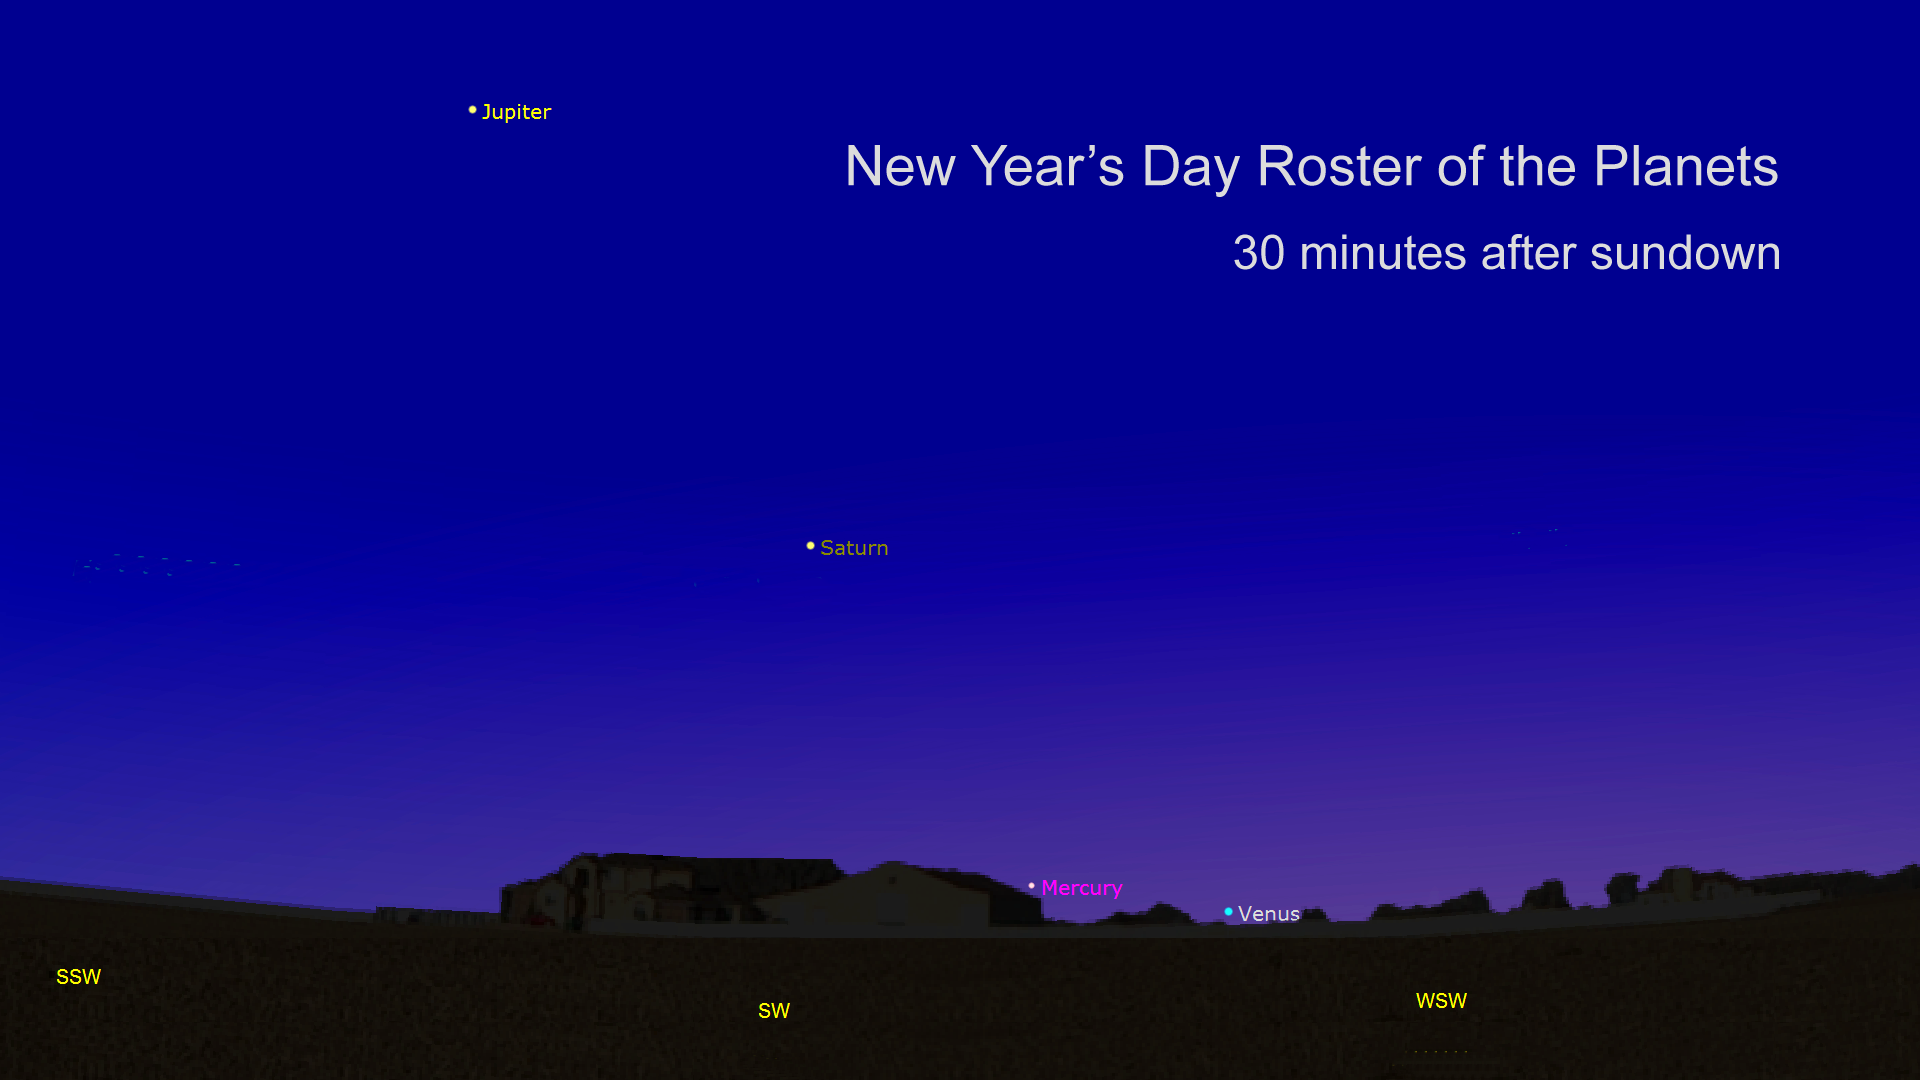 [Planets on New Year's Day]